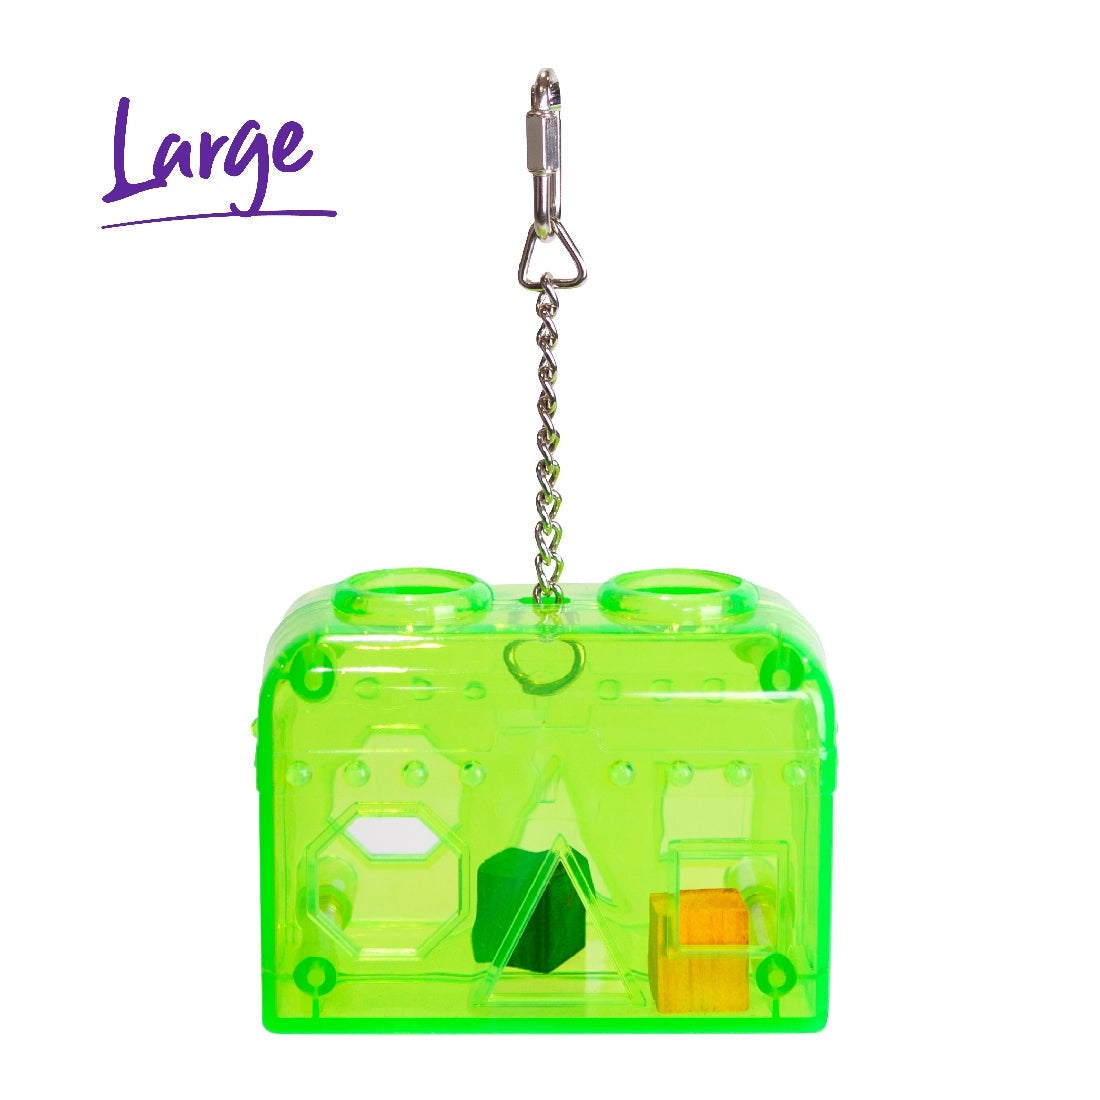 Large green transparent bird toy with chain on white background.